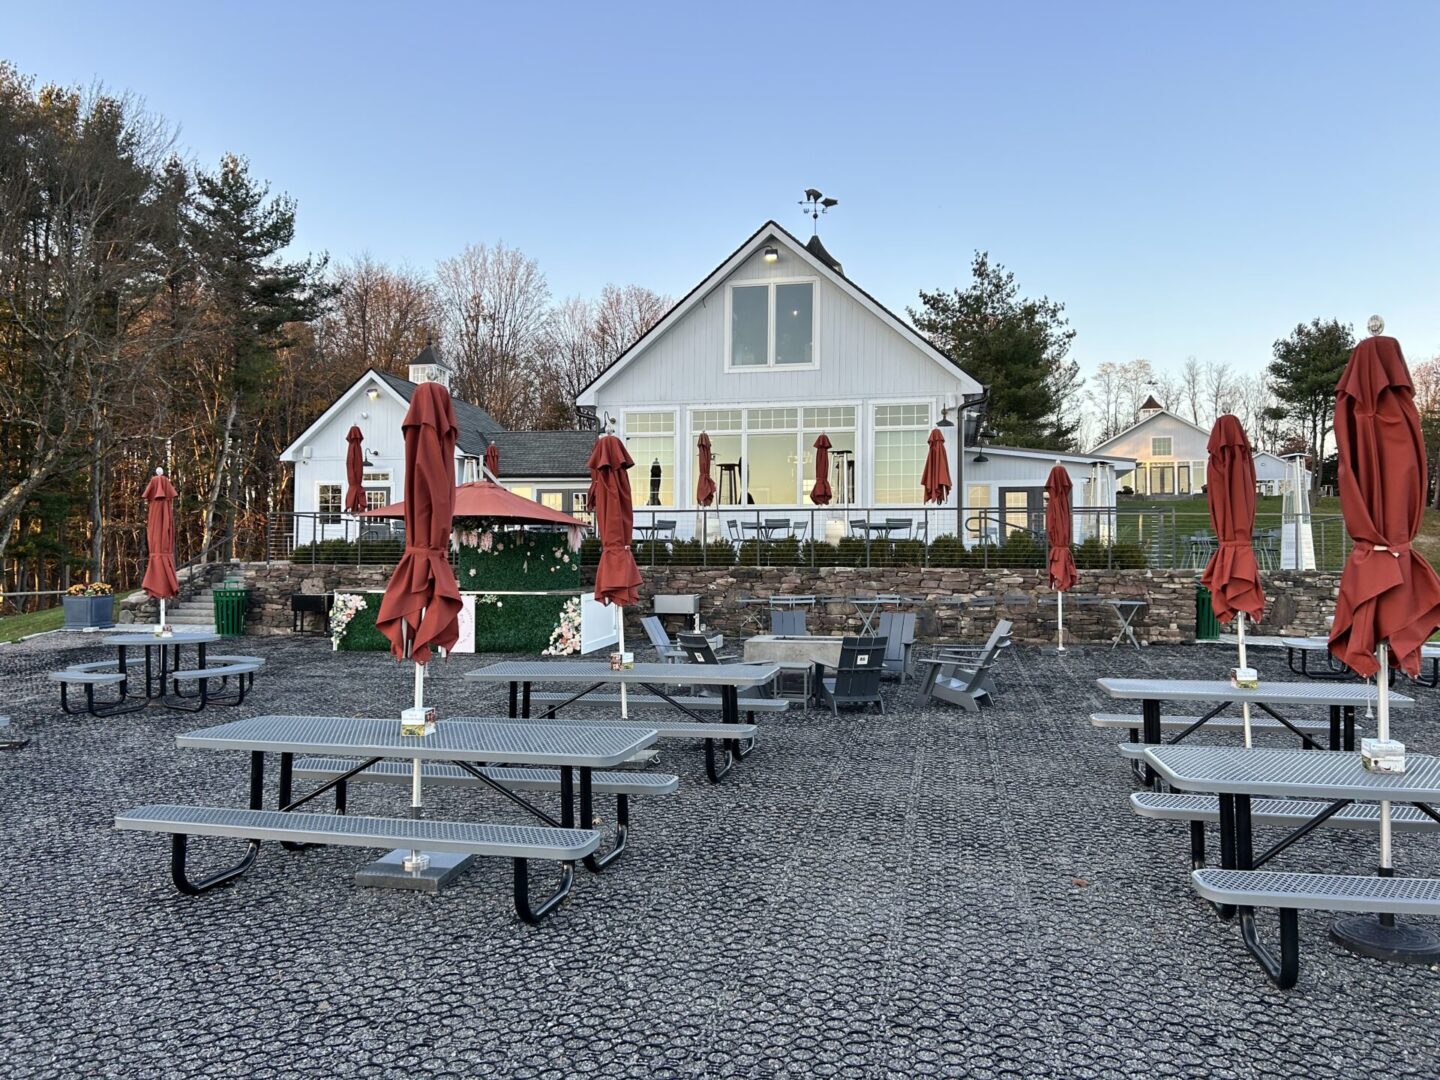 A group of picnic tables with umbrellas in the background.